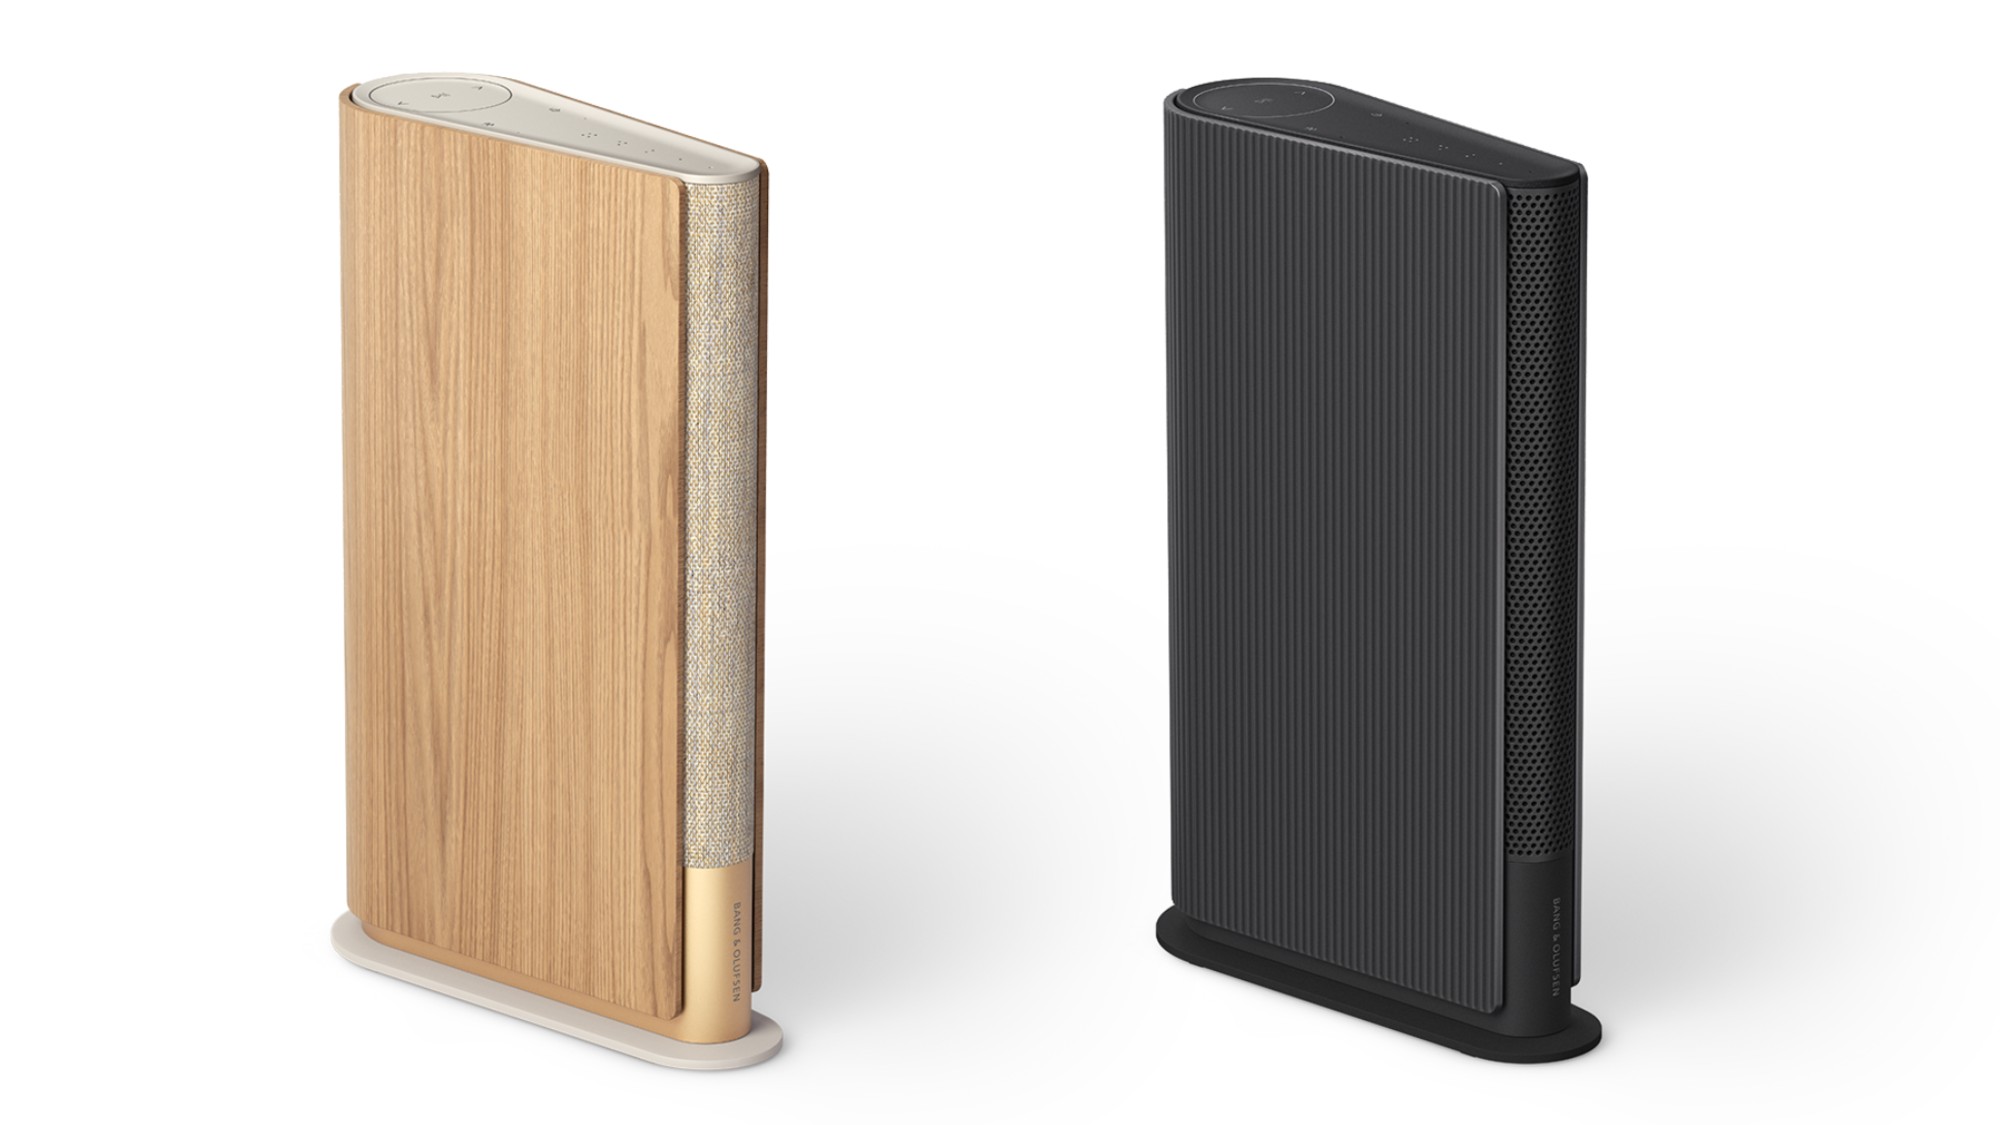 B&O brings the box into book form